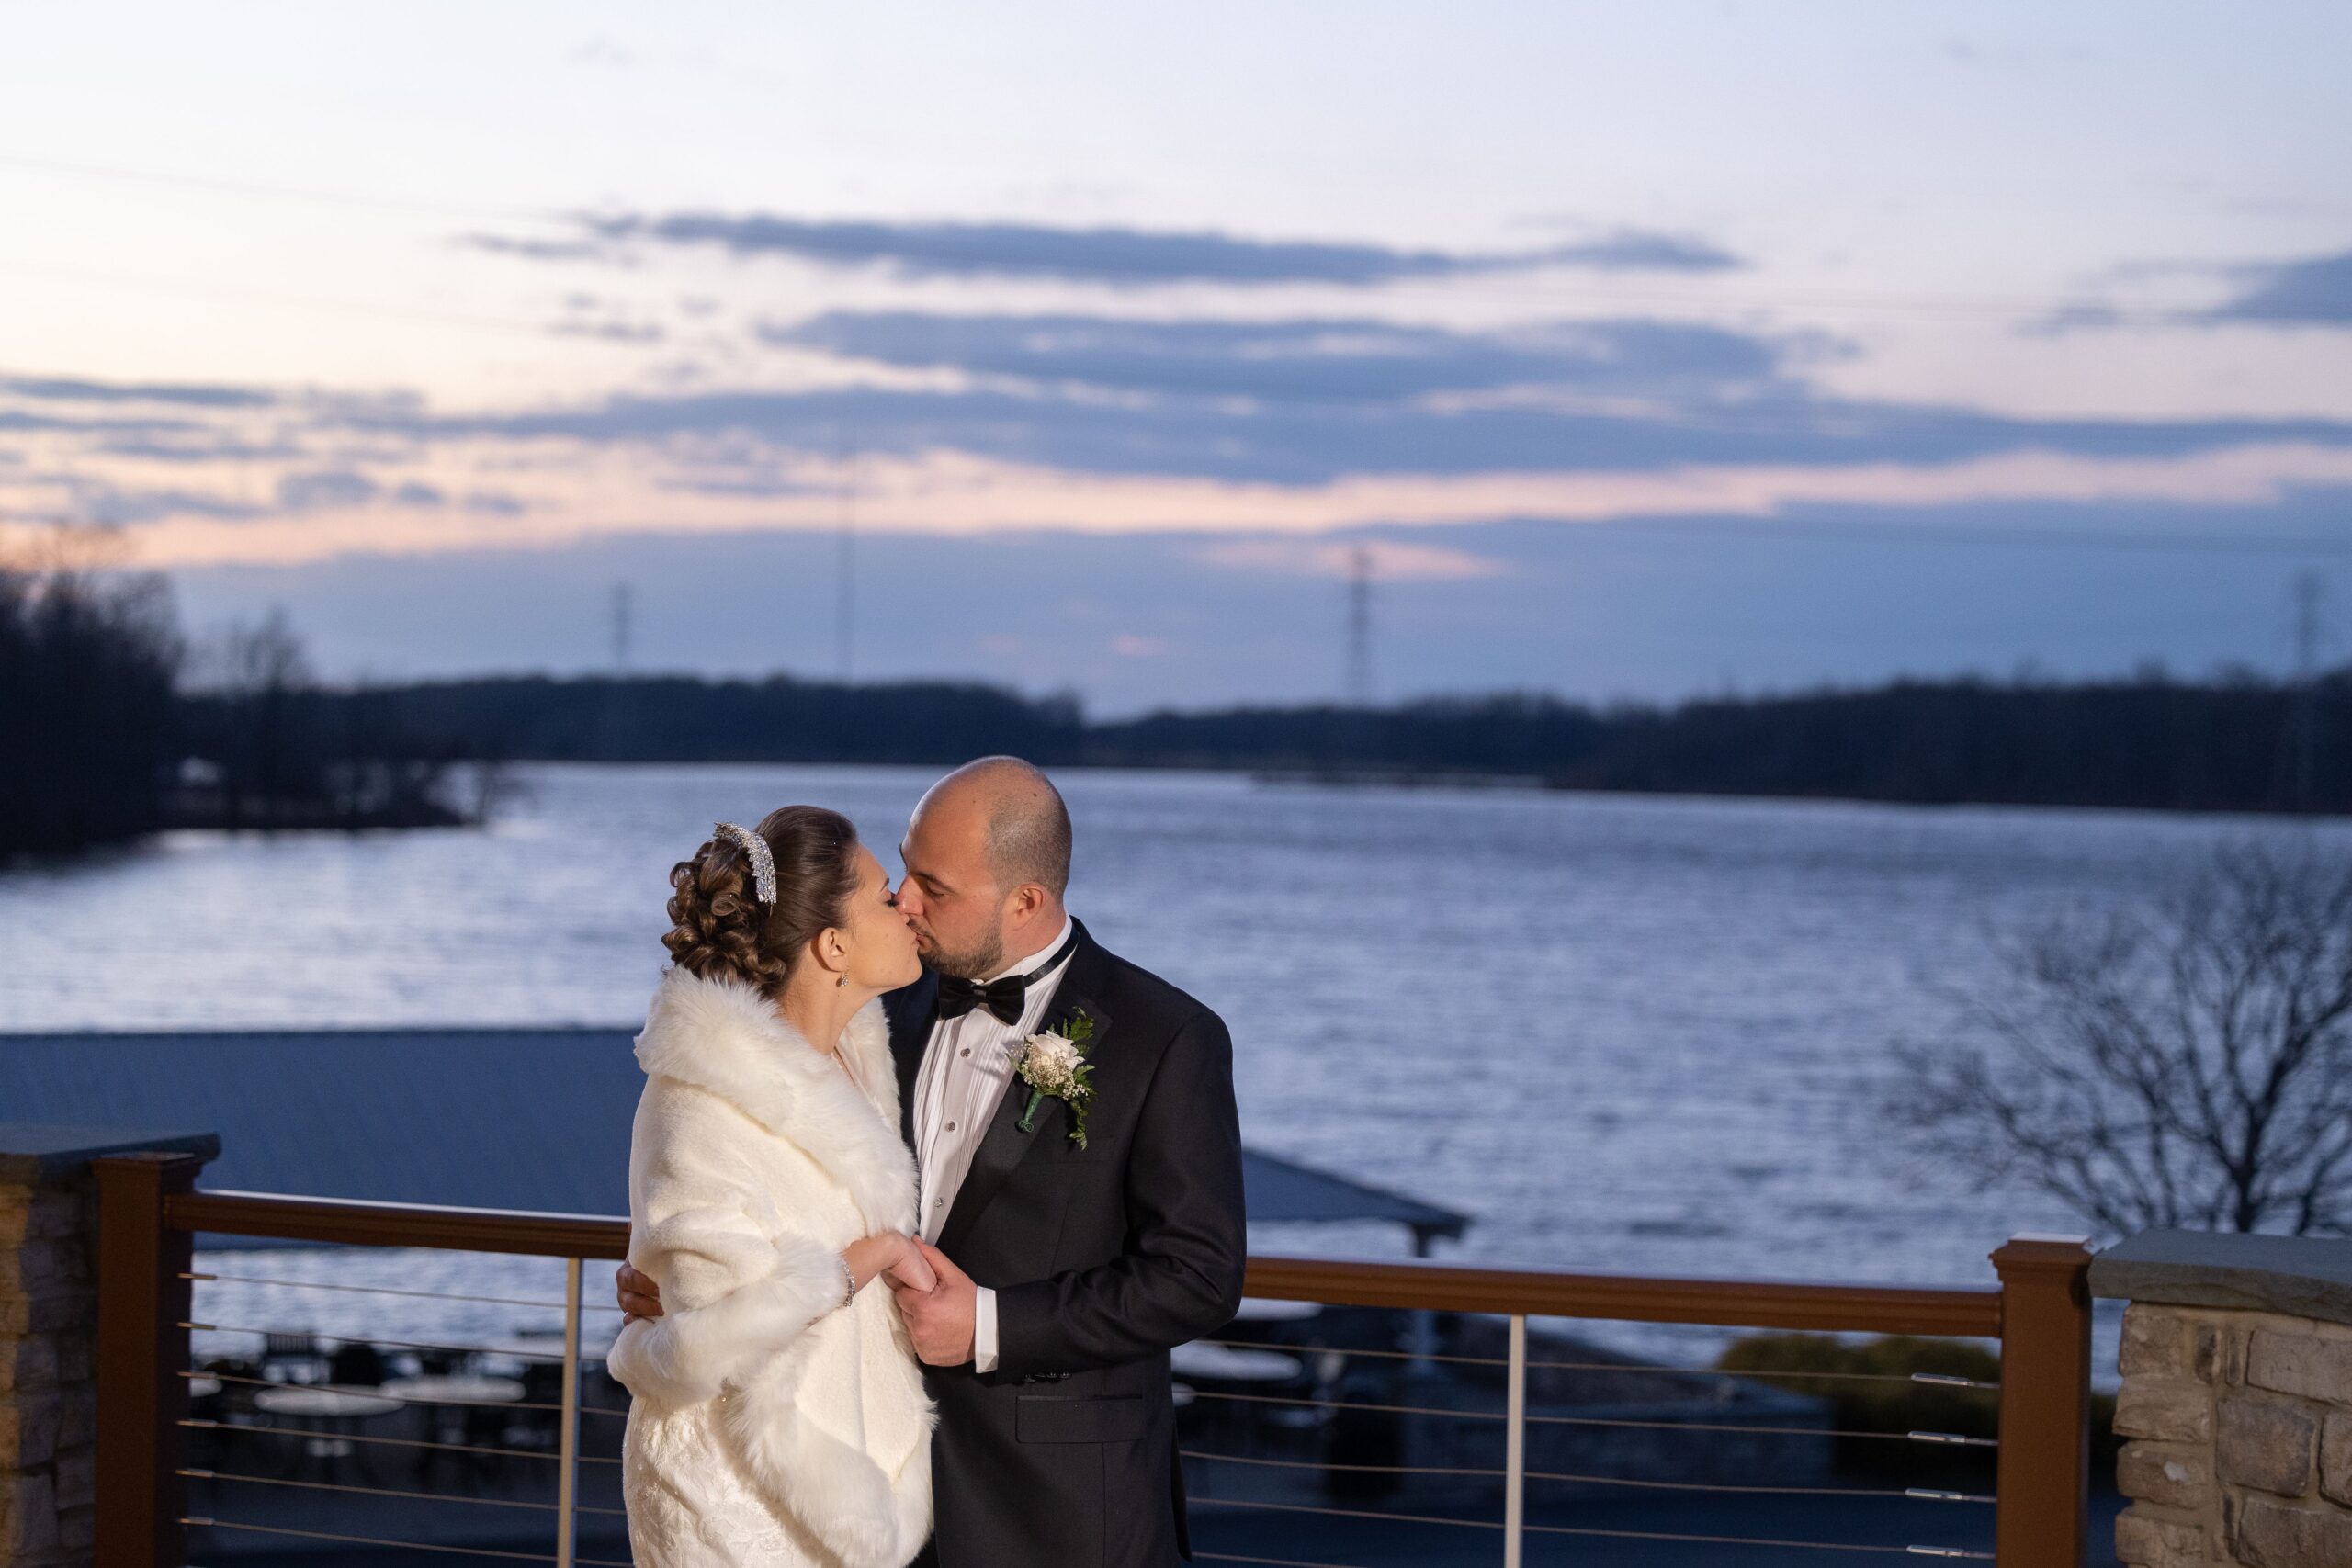 The Boathouse at Mercer Lake, West Windsor Township, NJ - Wedding Videography and Photography